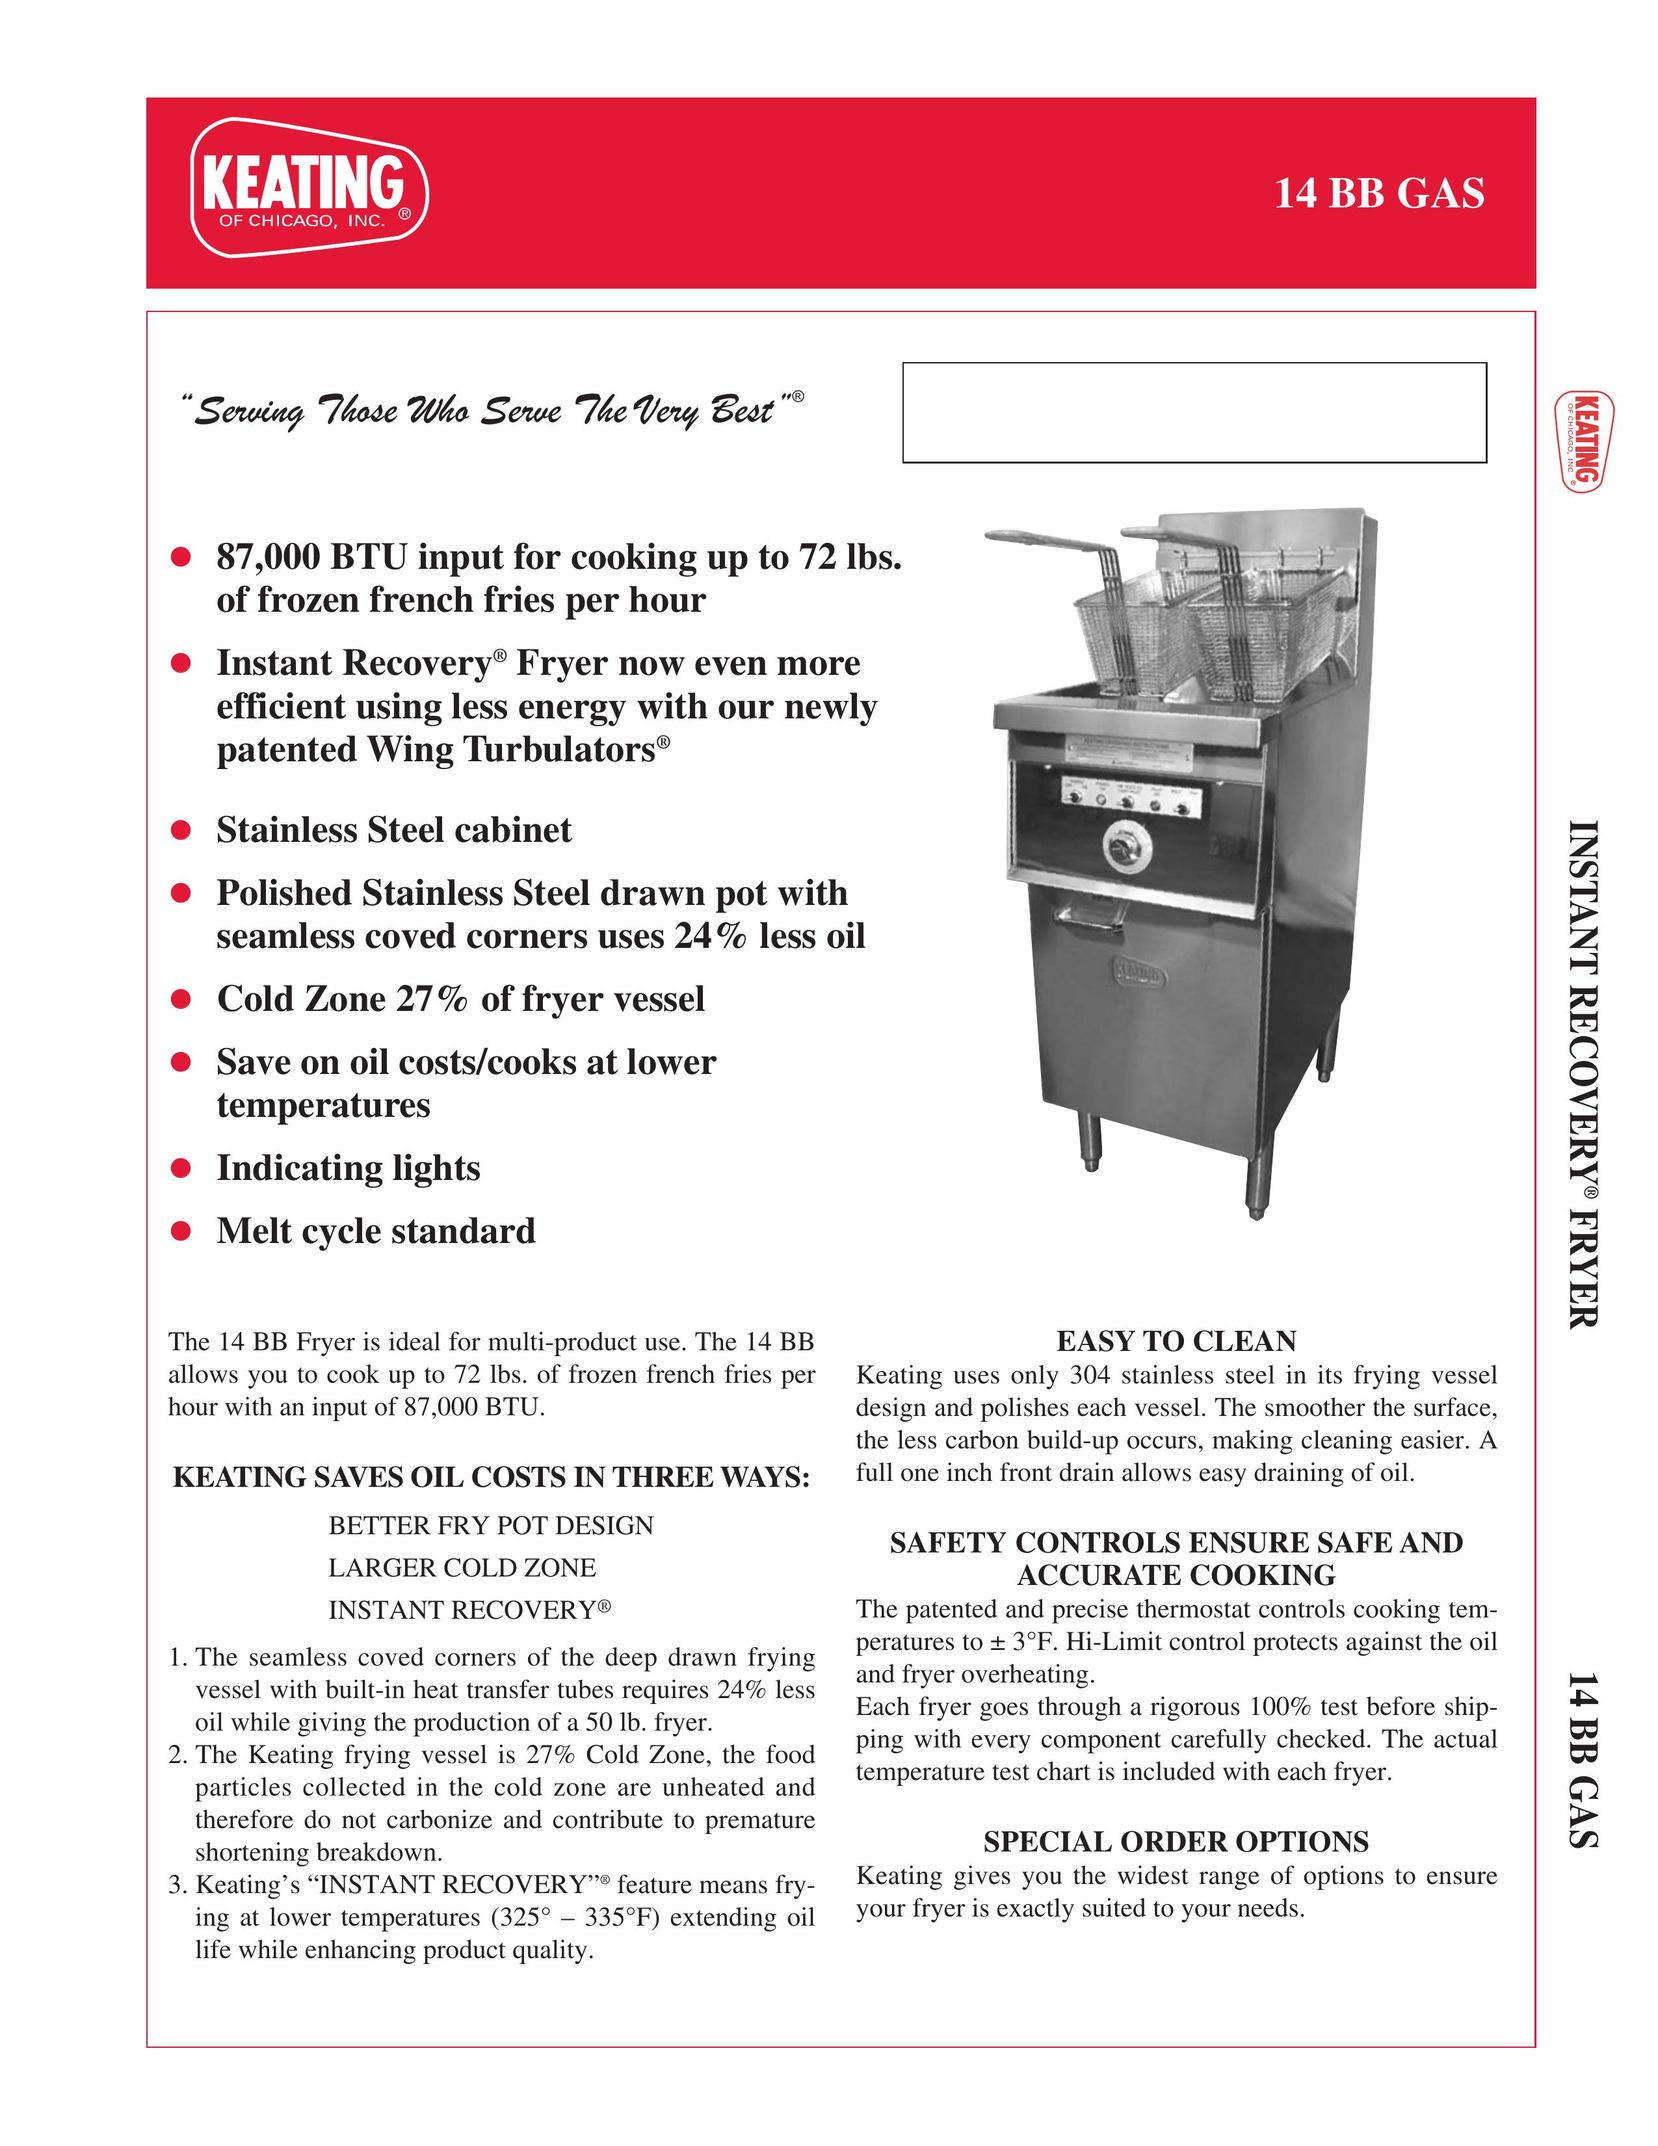 Keating Of Chicago 14 BB Gas Fryer User Manual